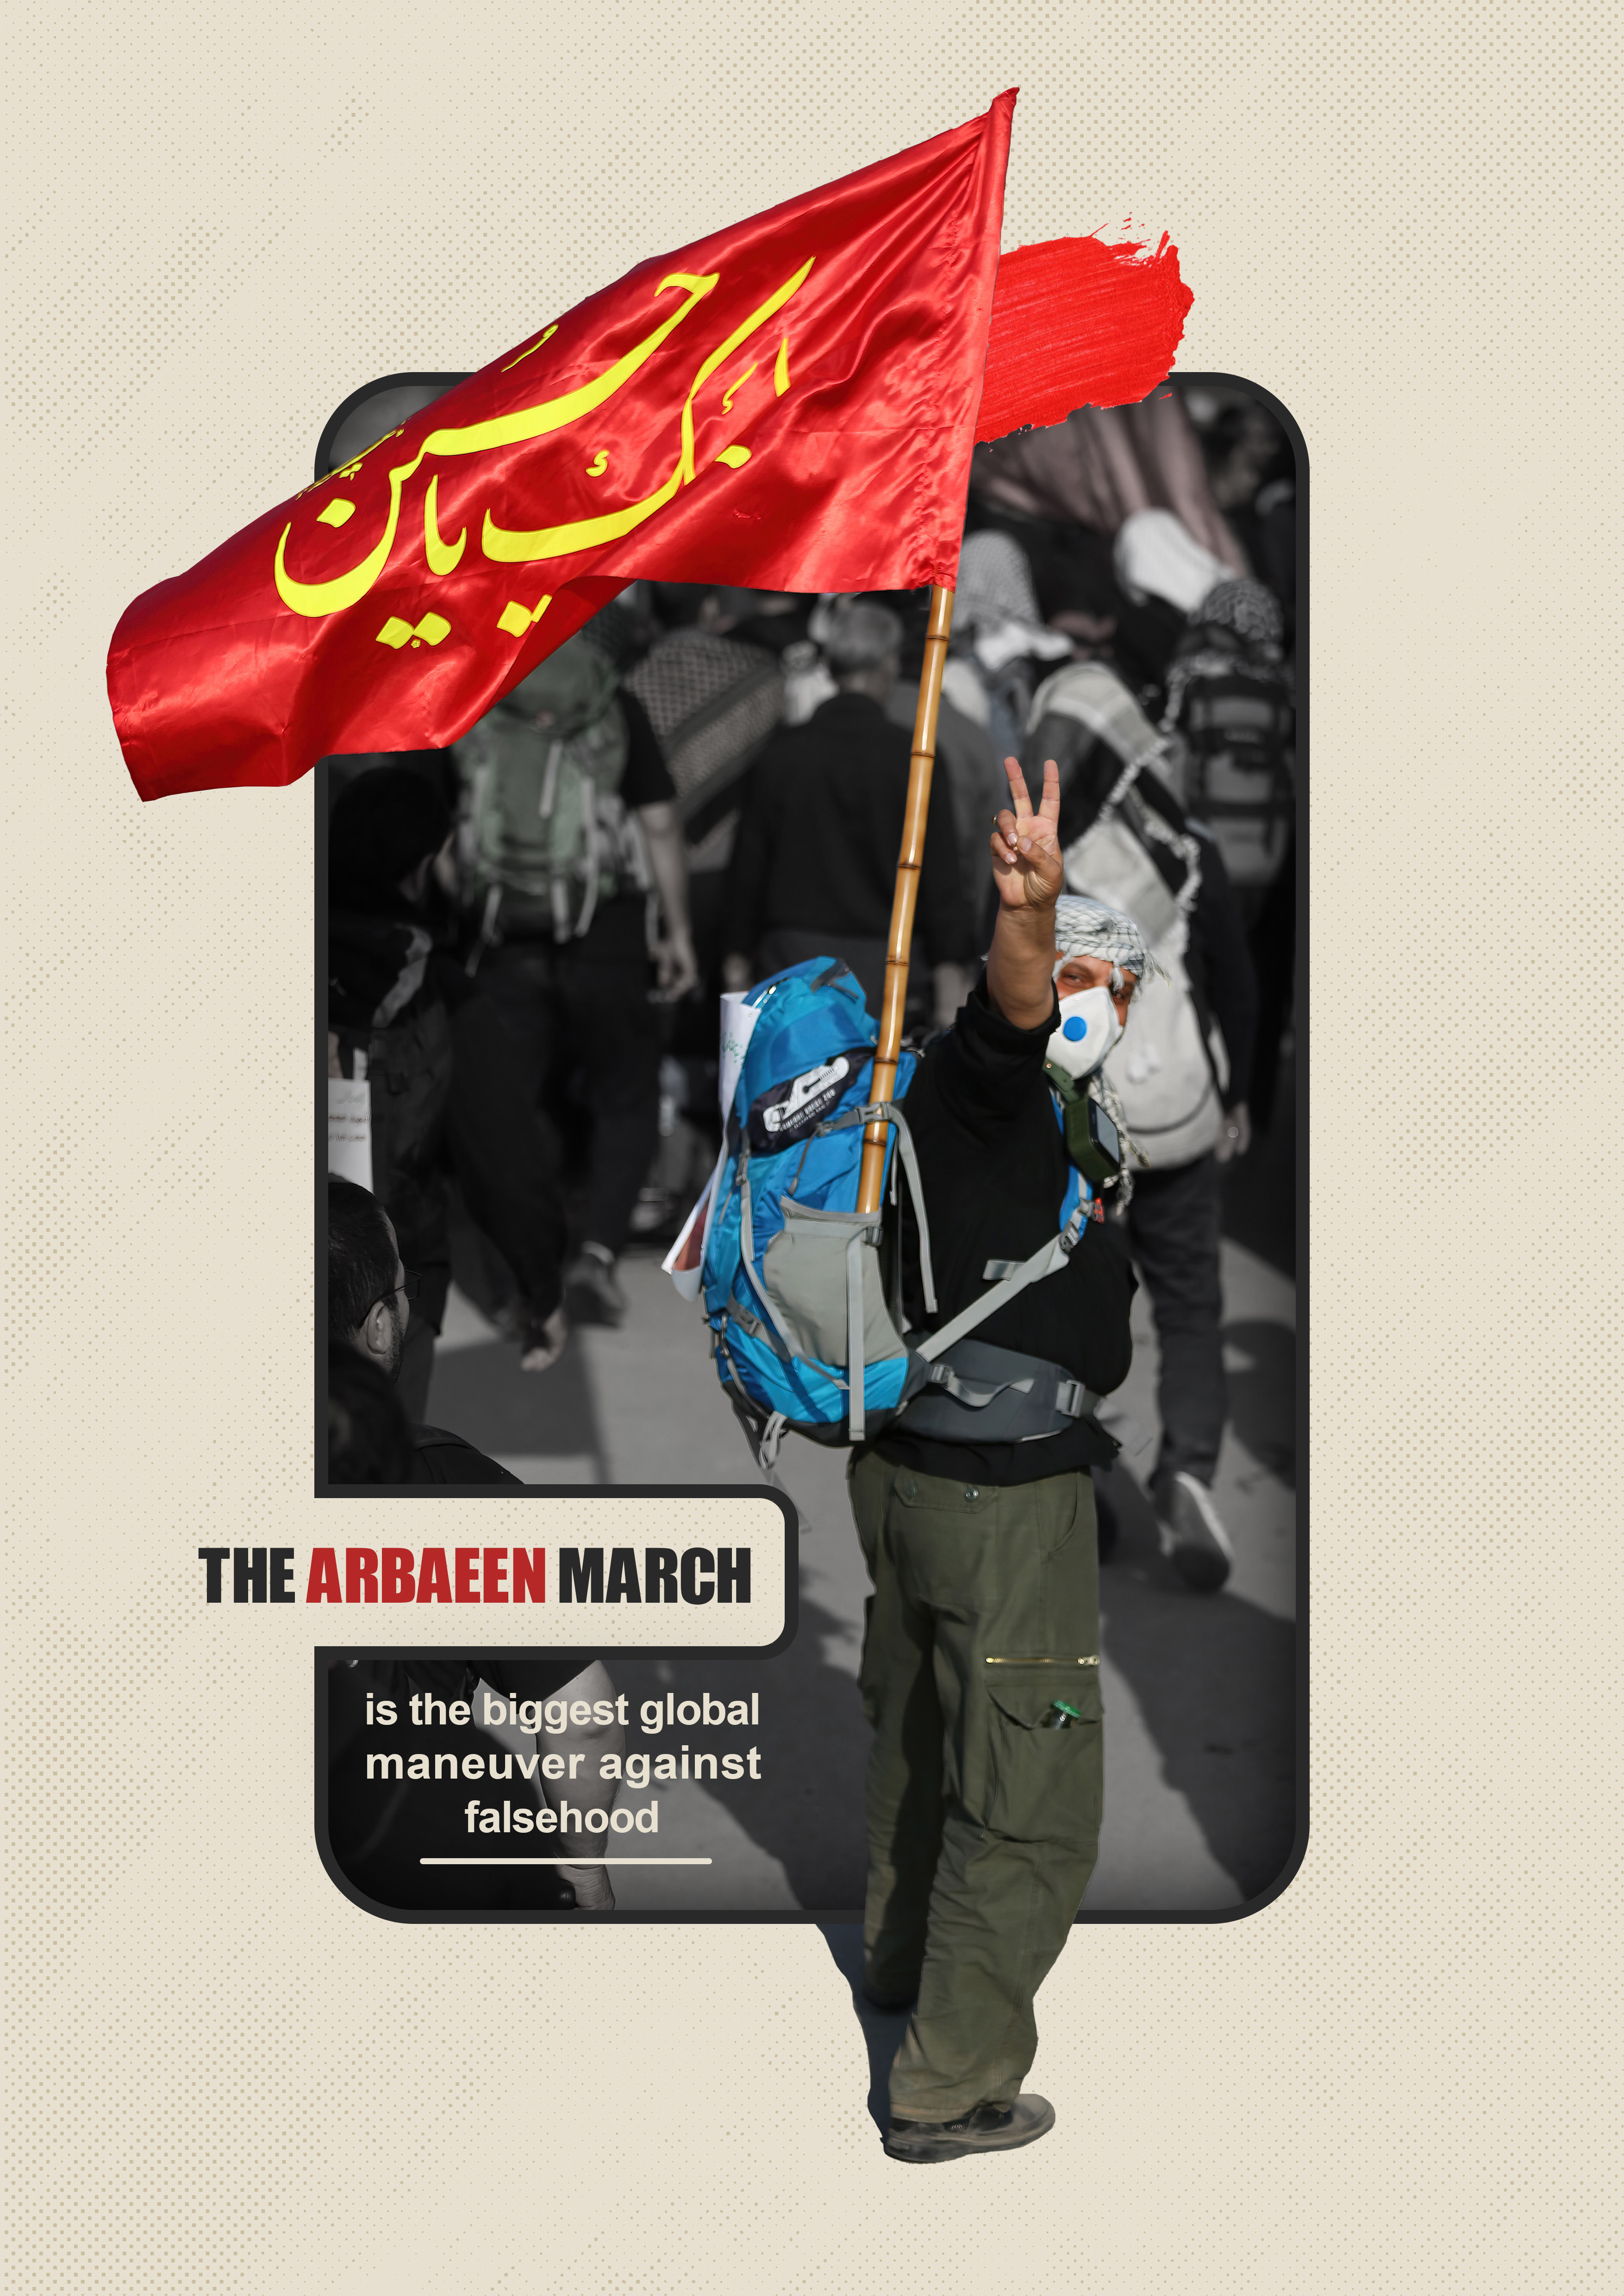 The arbaeen march